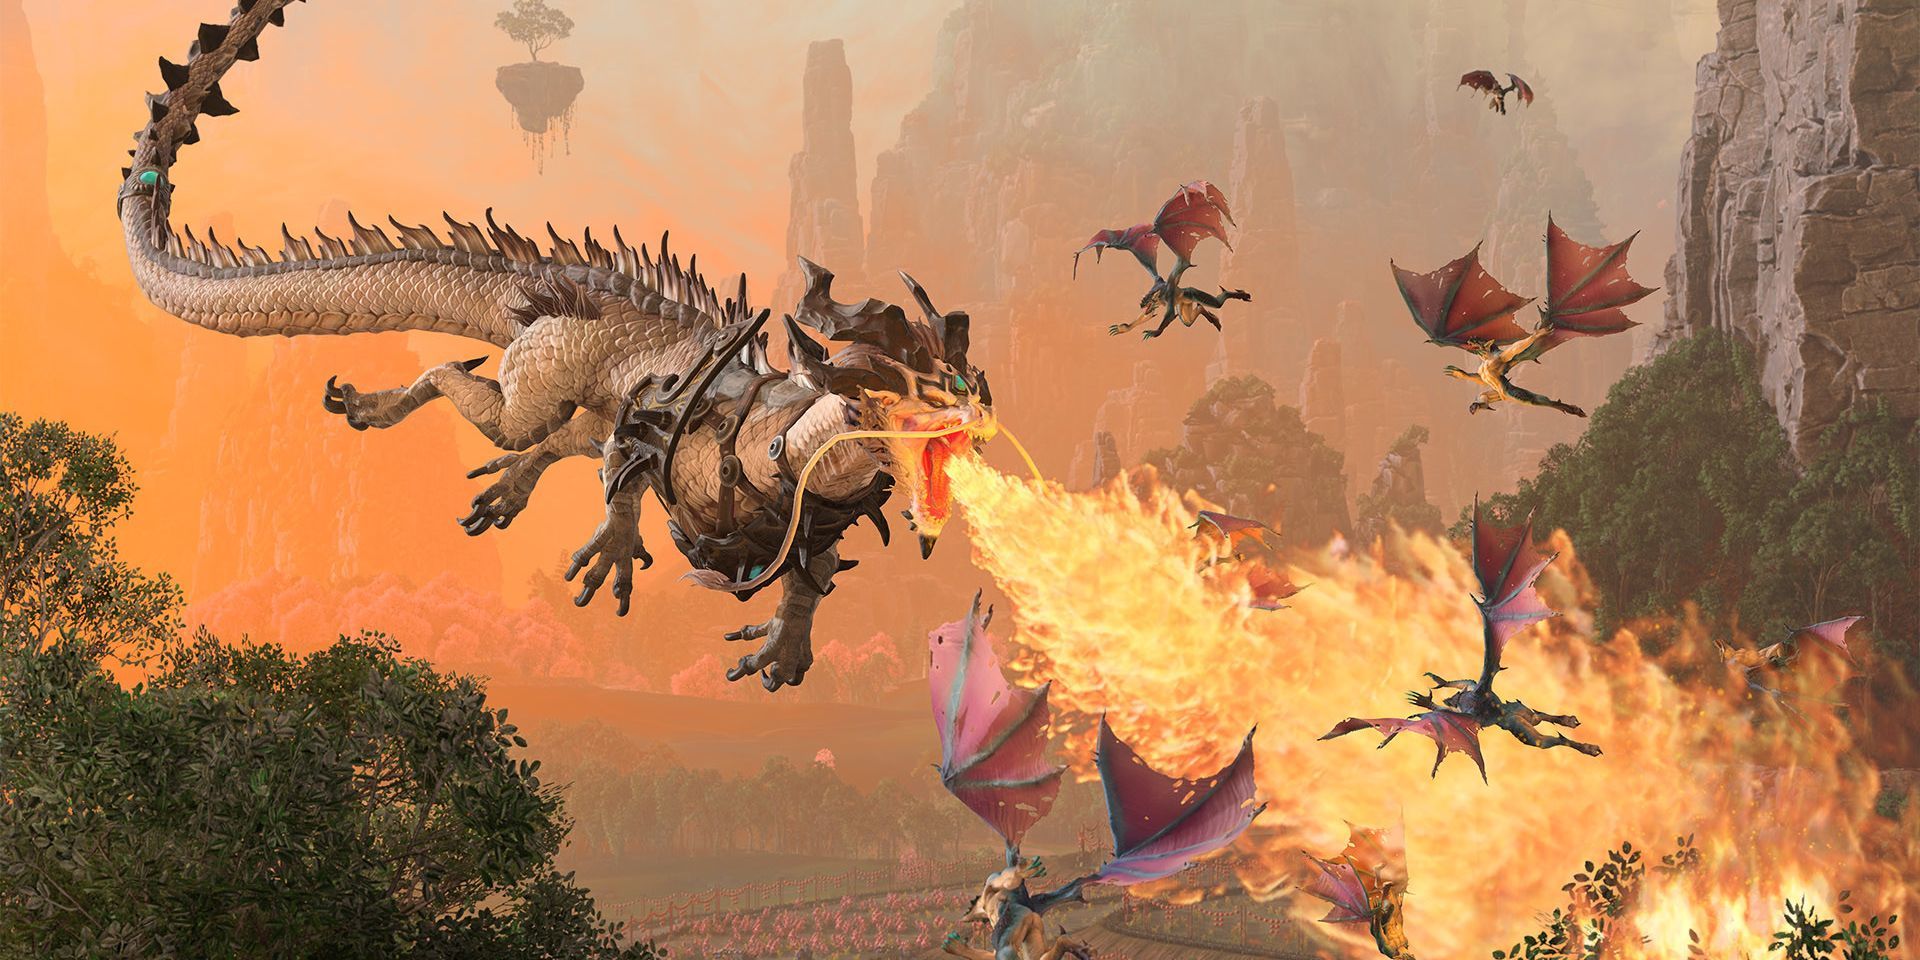 A flying snake breathing fire from Total War Warhammer 3